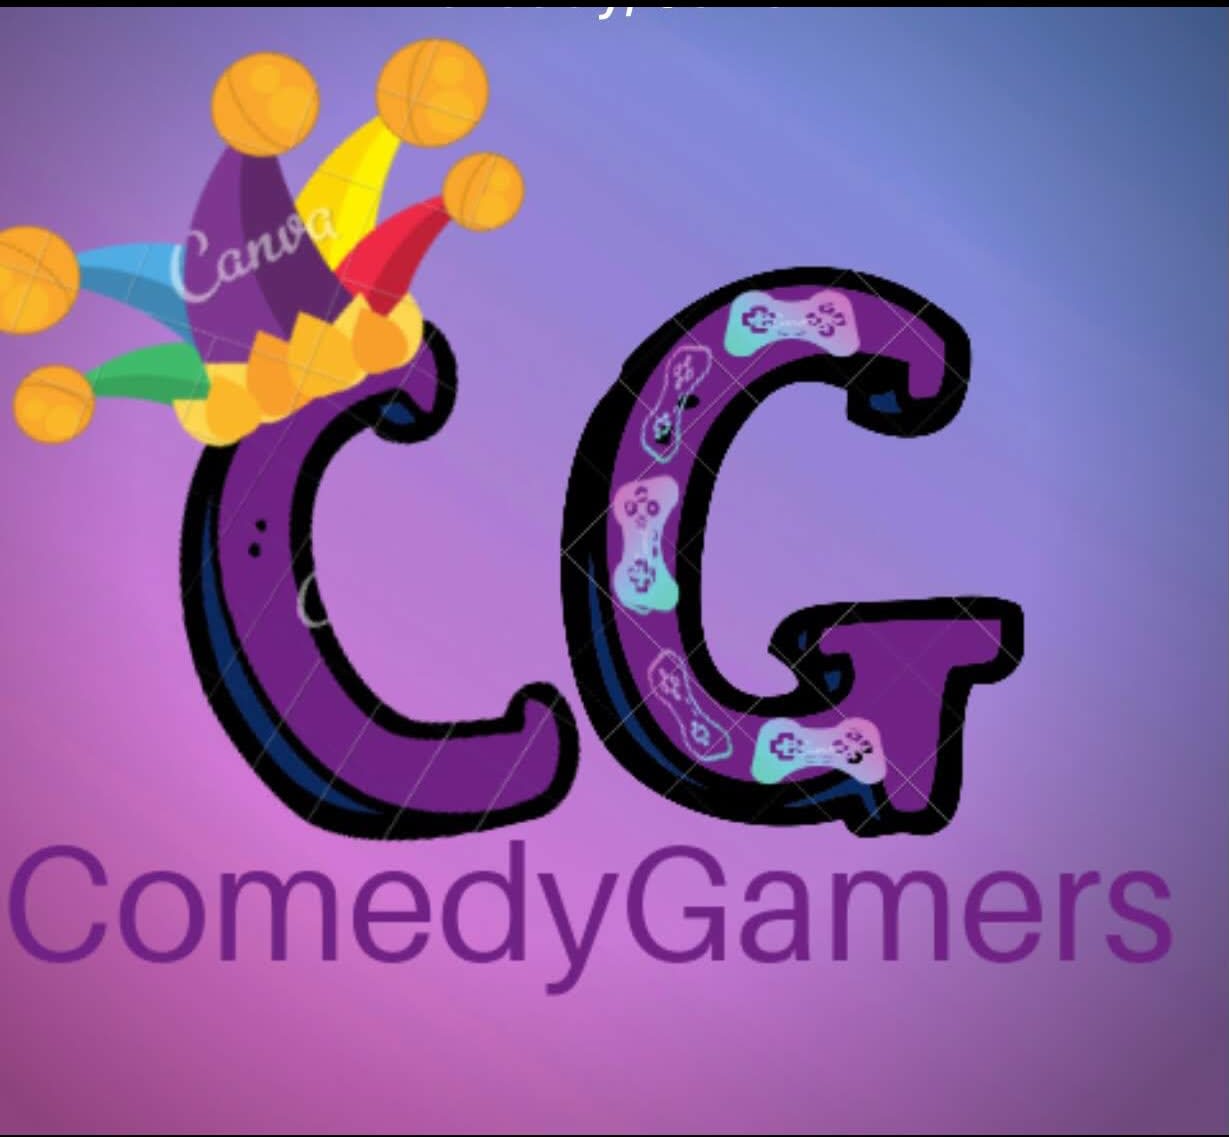 Comedygamers